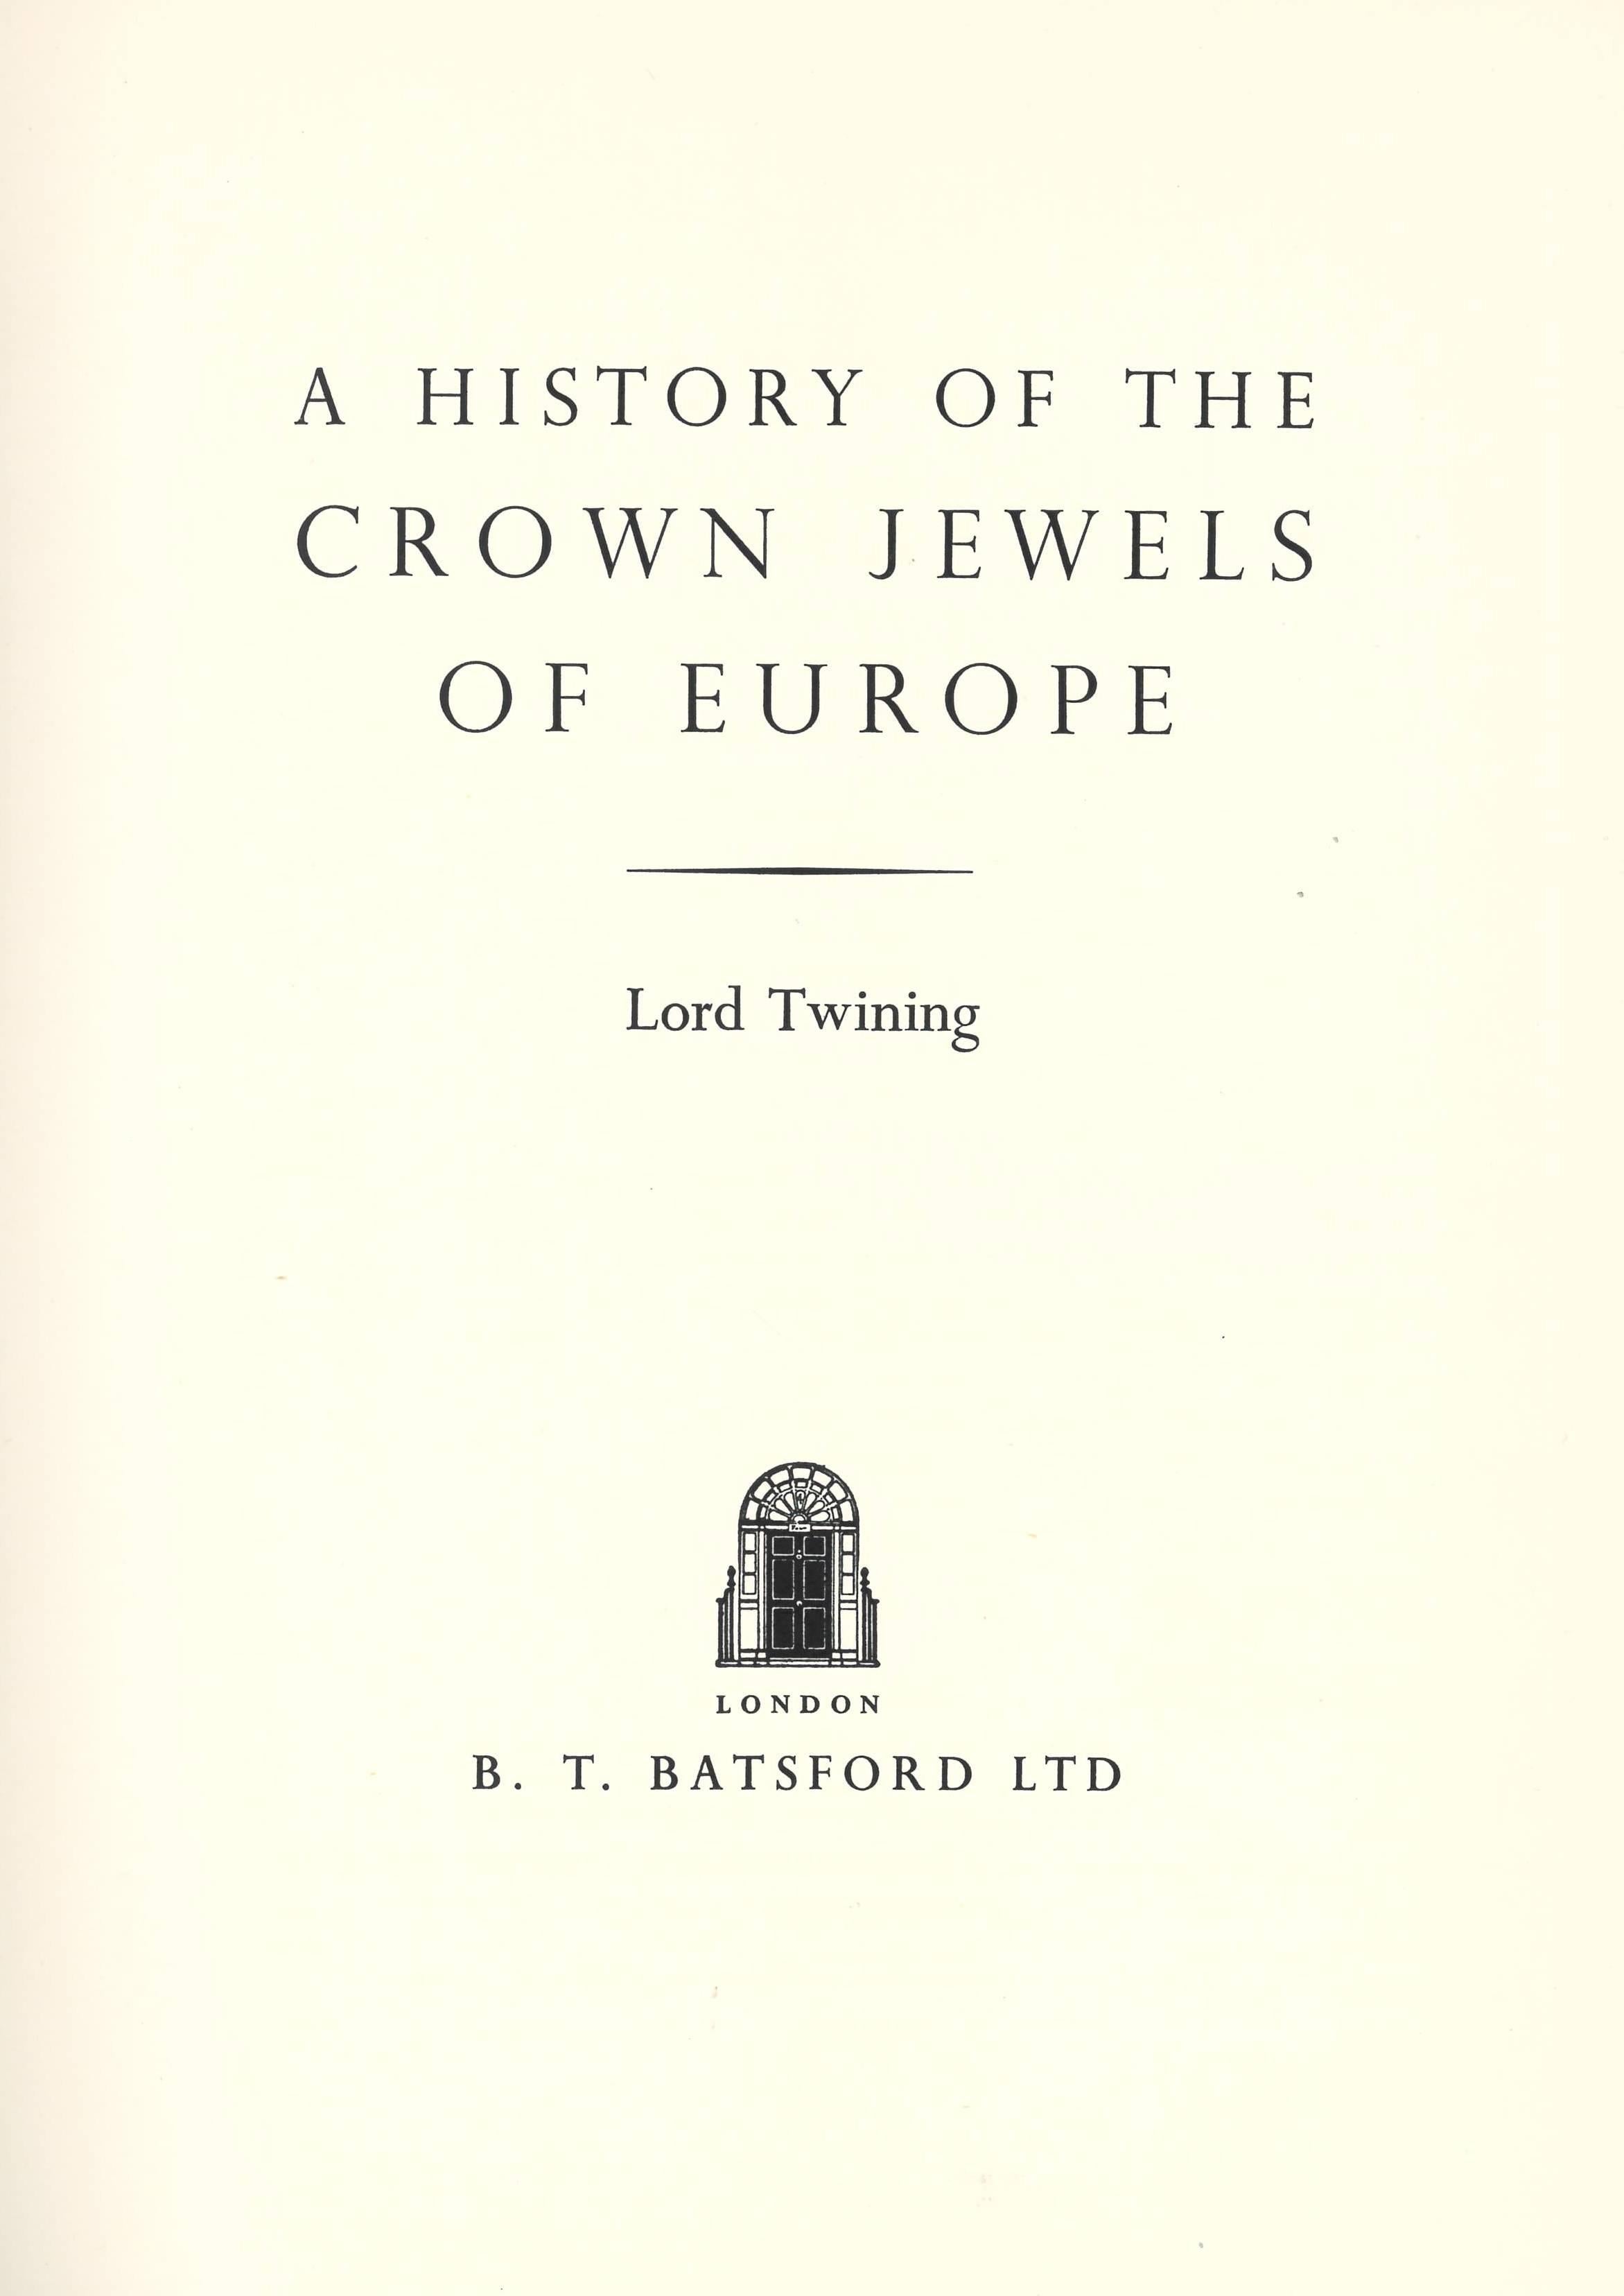 This book written by Lord Twining is a truly monumental work, which deals comprehensively with the history of European regalia and crown jewels. It covers a period of seventeen centuries and the information given is encyclopaedic. Each of the 27